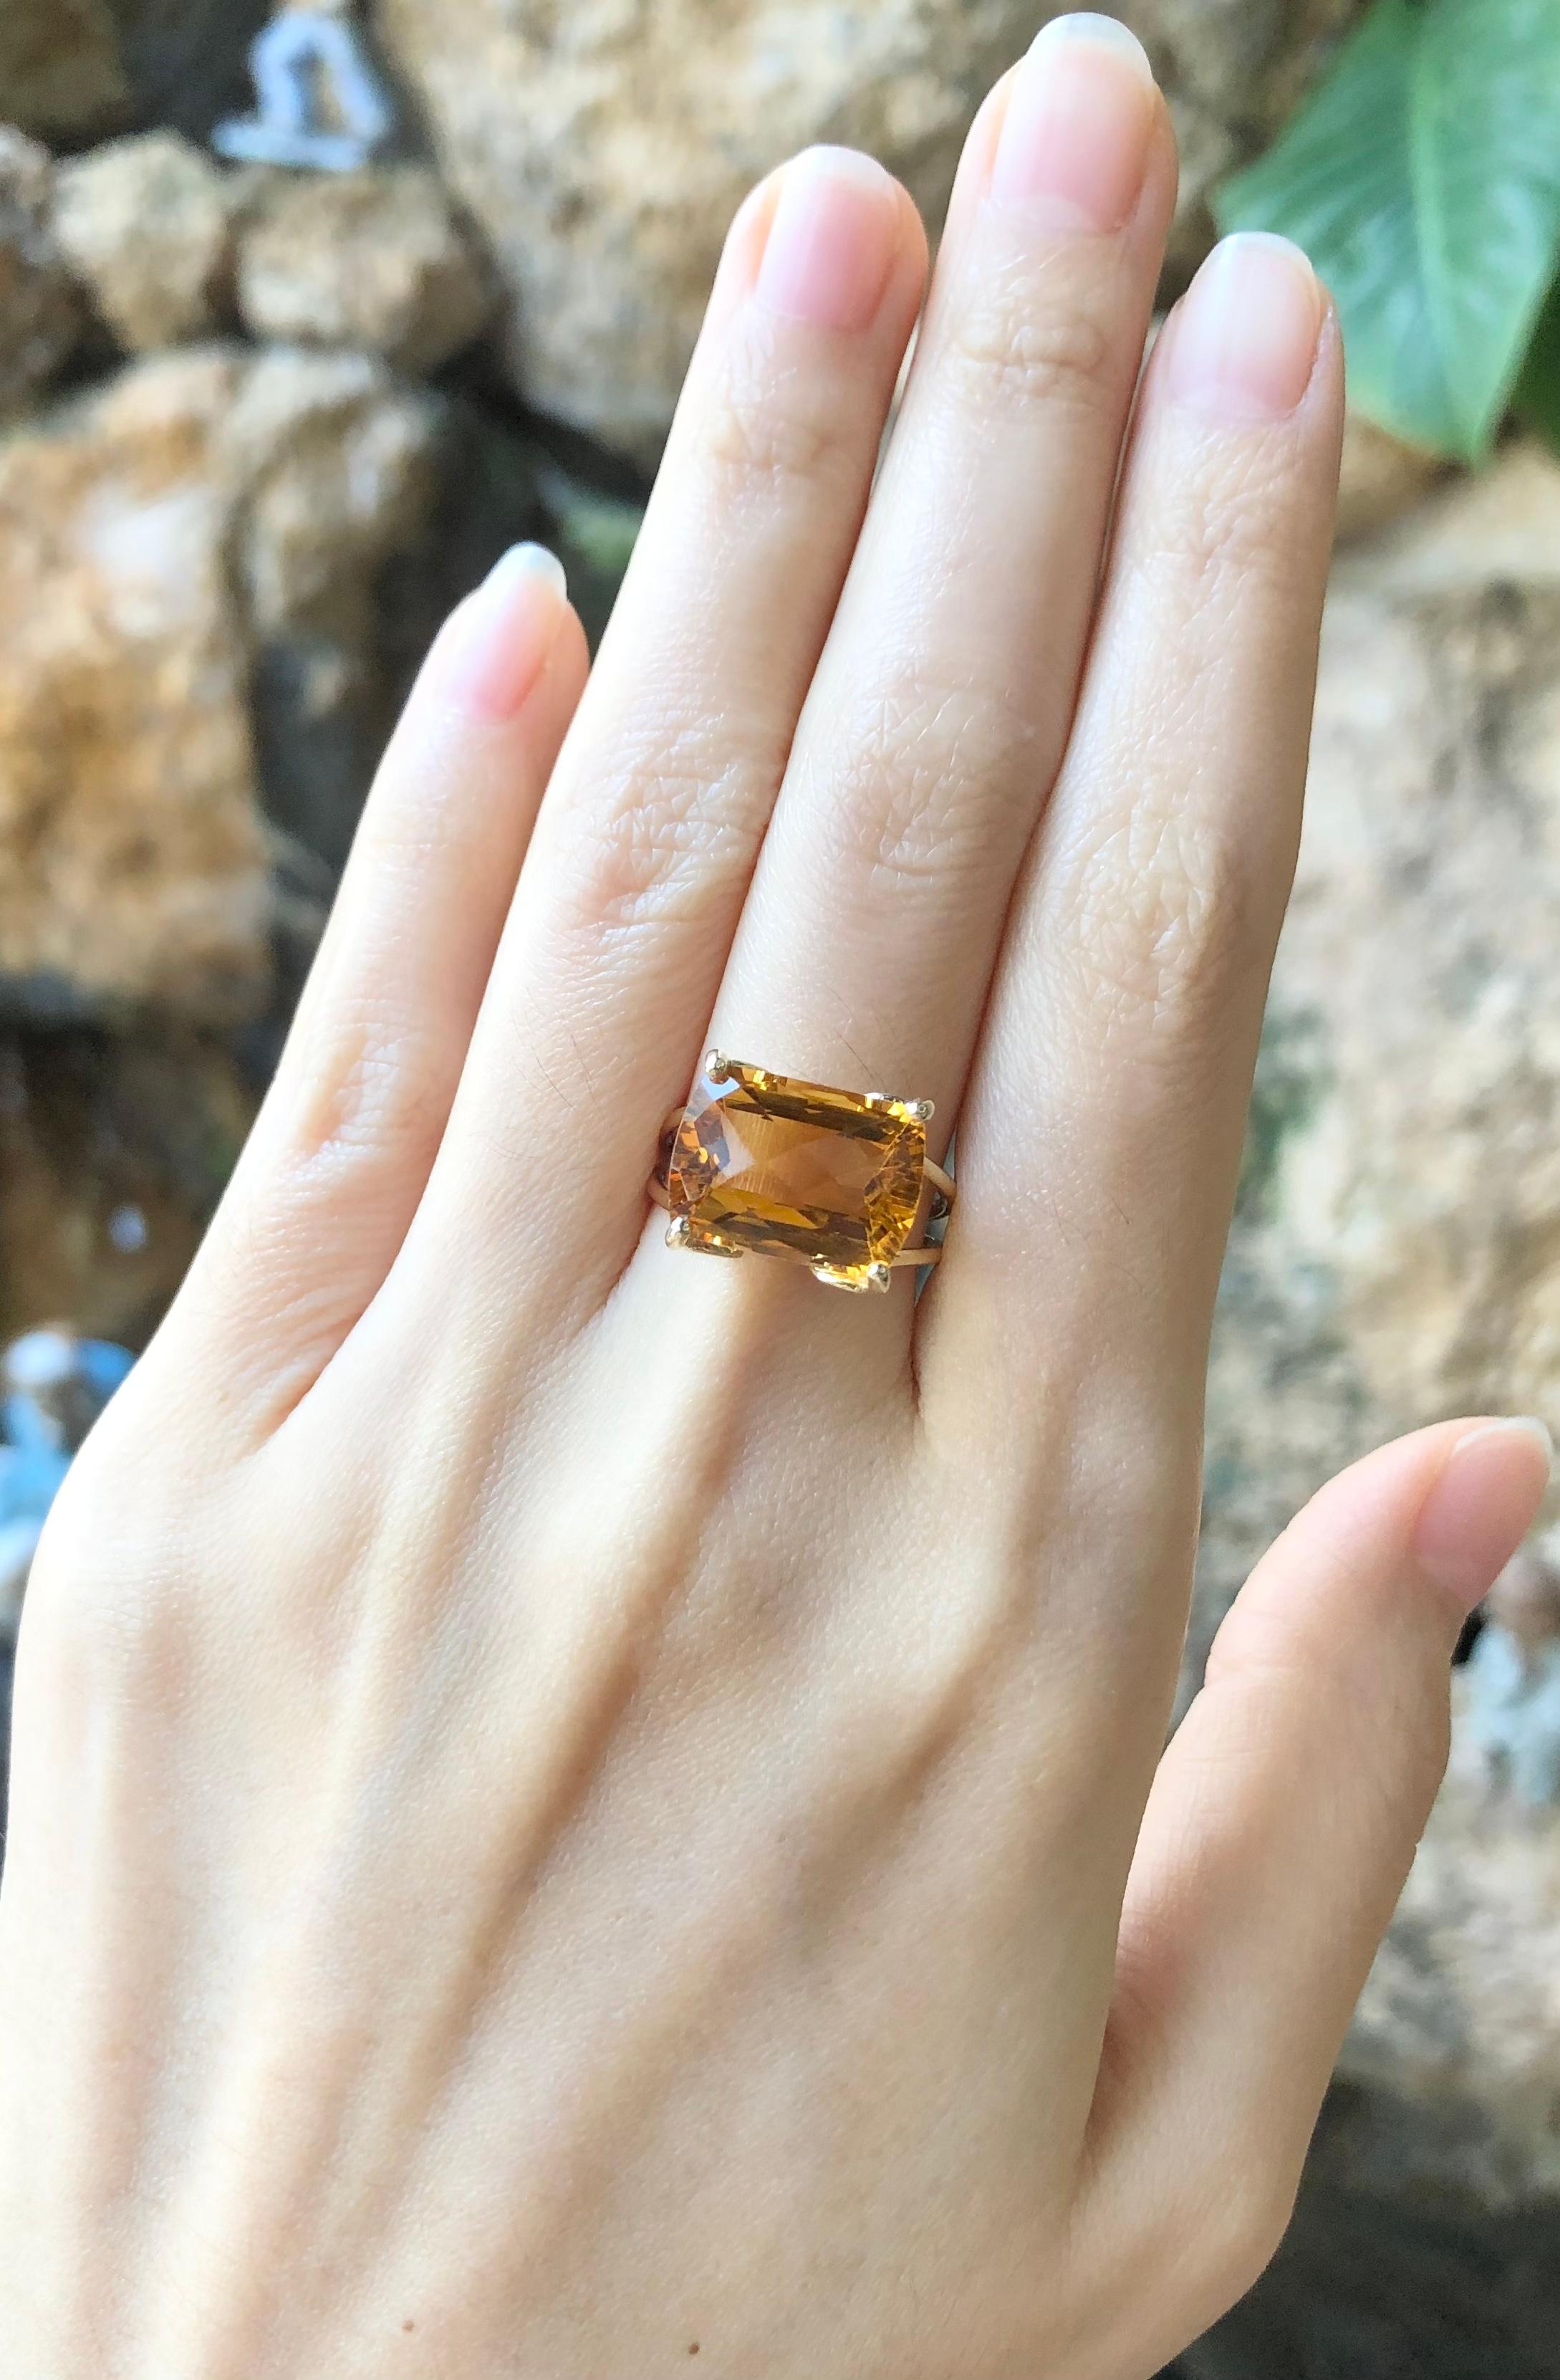 Citrine 6.82 carats Ring set in 14 Karat Gold Settings

Width:  1.4 cm 
Length: 1.0 cm
Ring Size: 52
Total Weight: 4.65 grams


